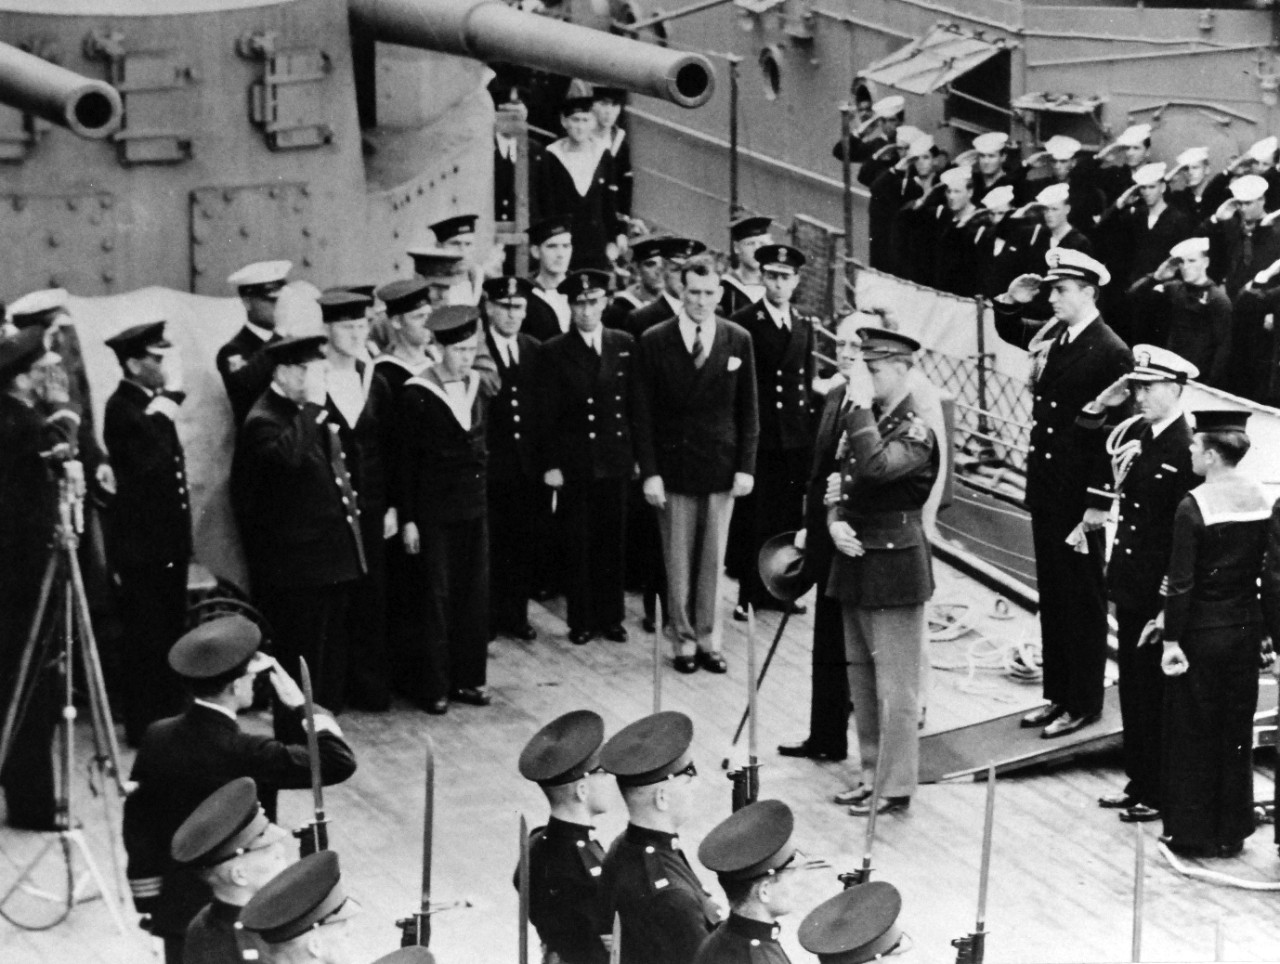 80-G-26862: Atlantic Charter, August 1941.  President Franklin D. Roosevelt and staff coming aboard HMS Prince of Wales from USS Augusta (CA-31) during the Atlantic Charter meeting.    Photograph released August 1941.   Official U.S. Navy Photograph, now in the collections of the National Archives.  (2016/03/22).